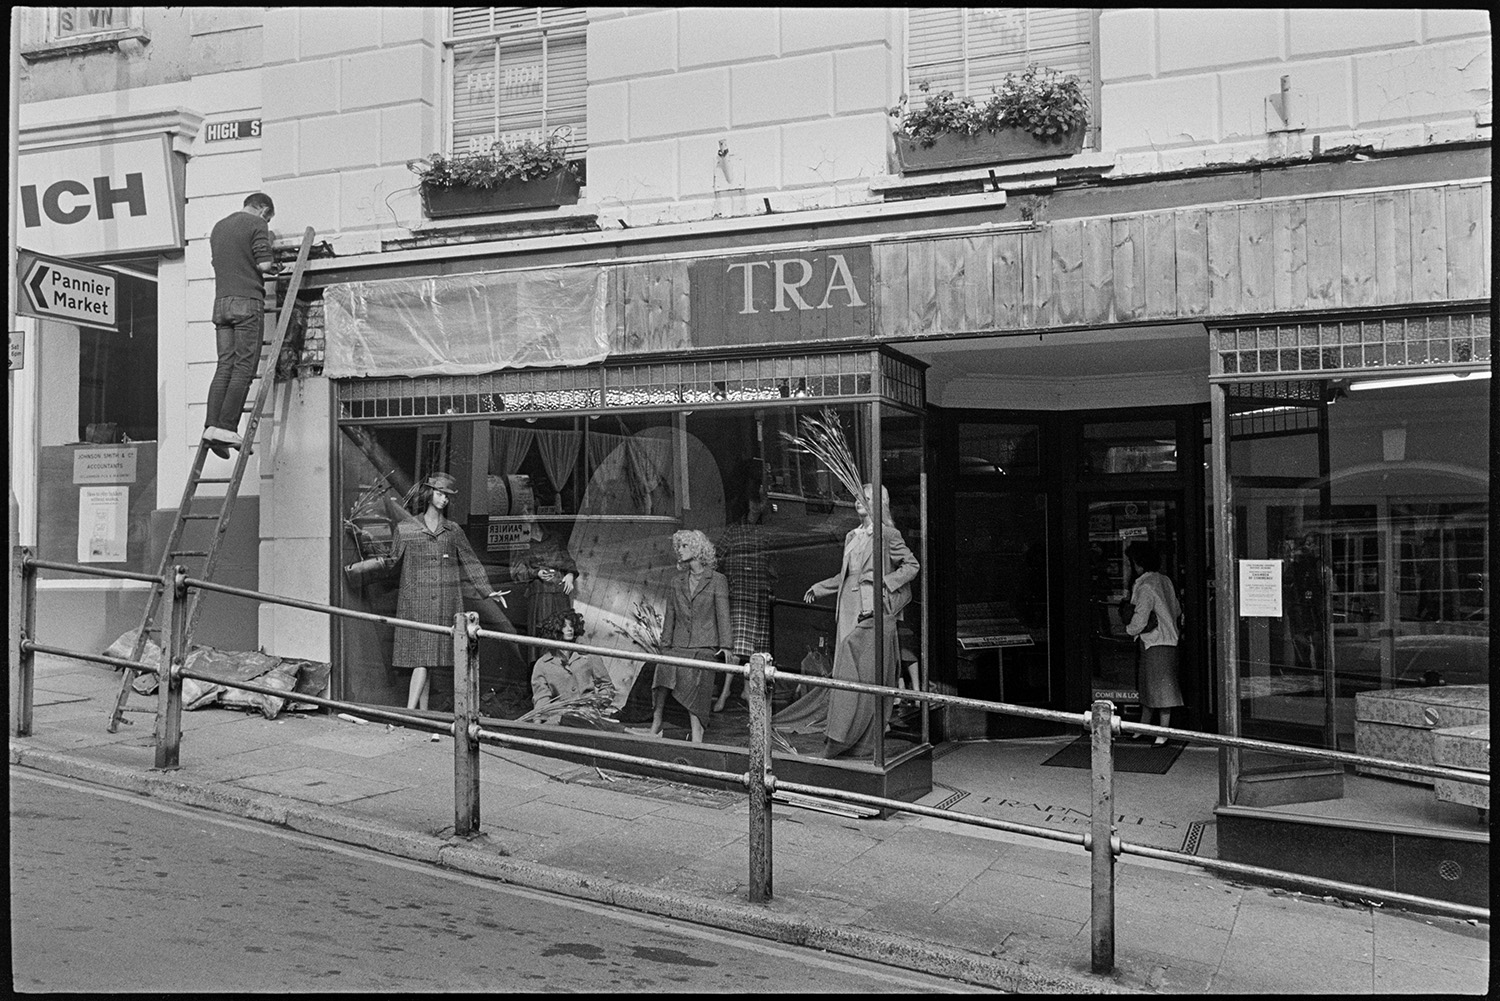 The front of Trapnells clothes shop being renovated shortly before the shop closed, in Bideford High Street. A man is up a ladder working on the shop sign. Mannequins modelling clothes can be seen in the shop front window.